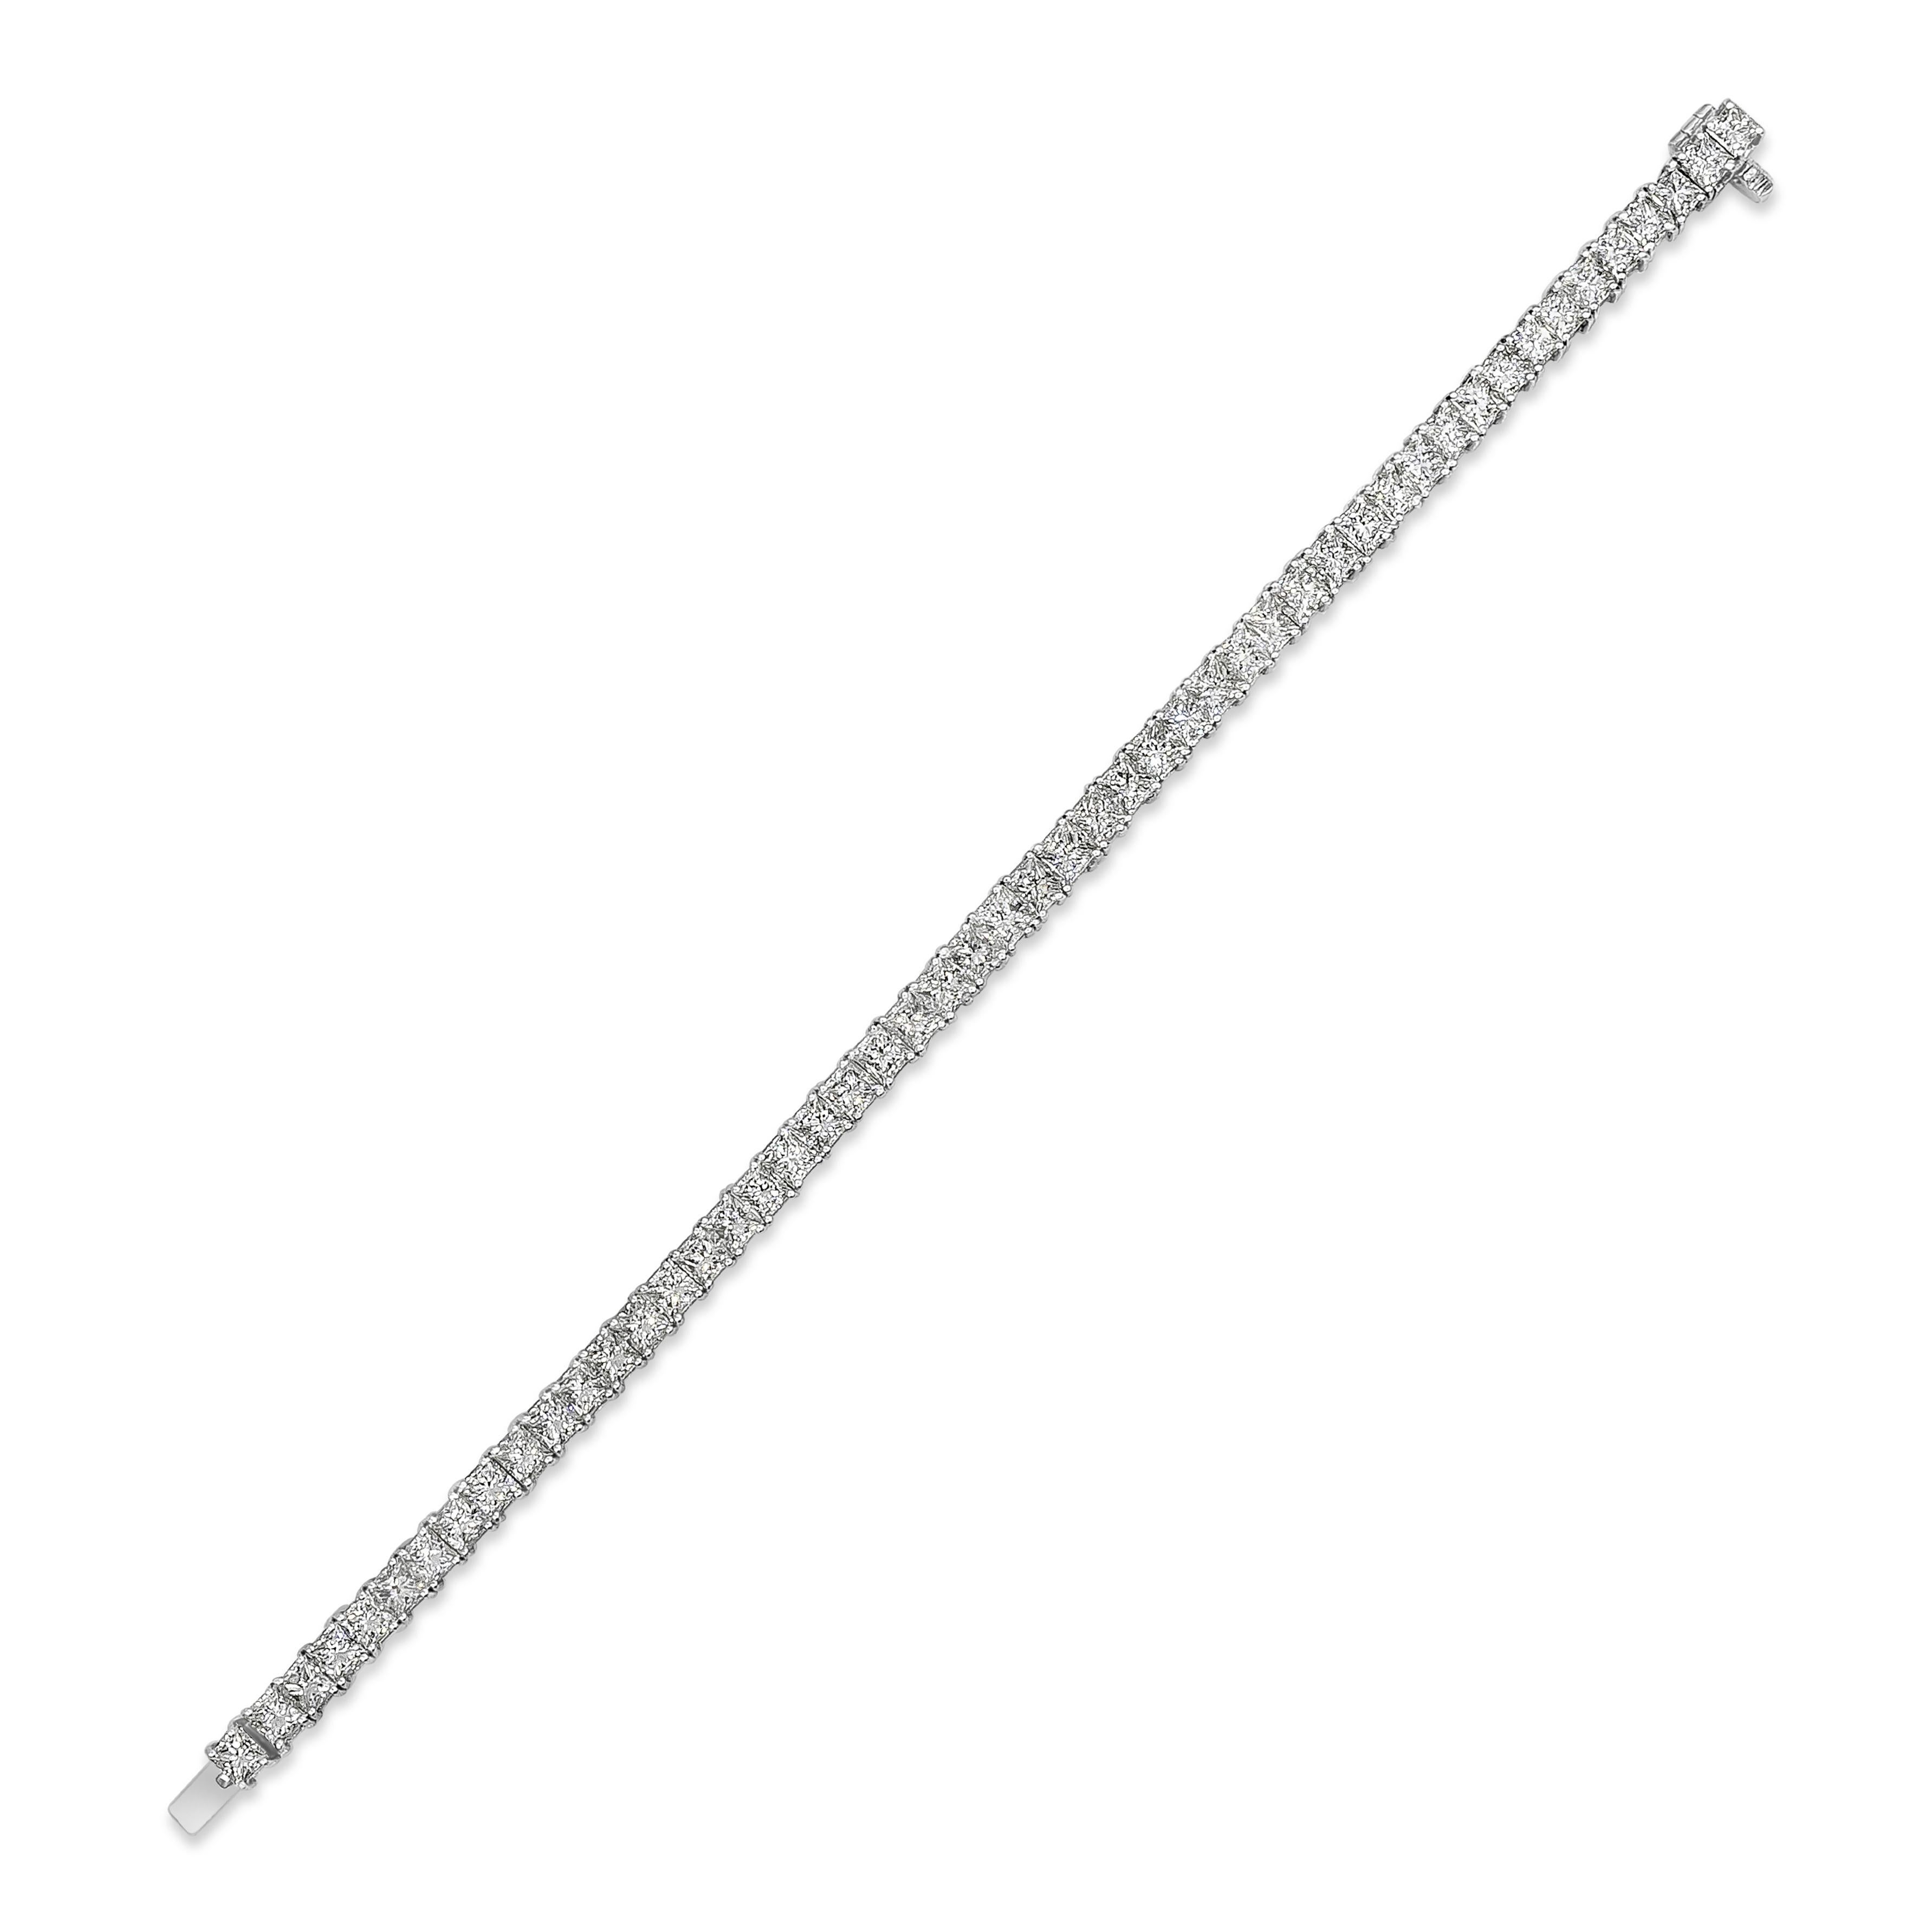 Classic tennis bracelet showcasing princess cut diamonds weighing 13.21 carats total, E-F Color and VS in Clarity, set in a classic four-prong basket setting. Finely made in 18K White Gold and 7 inches in Length.

Roman Malakov is a custom house,